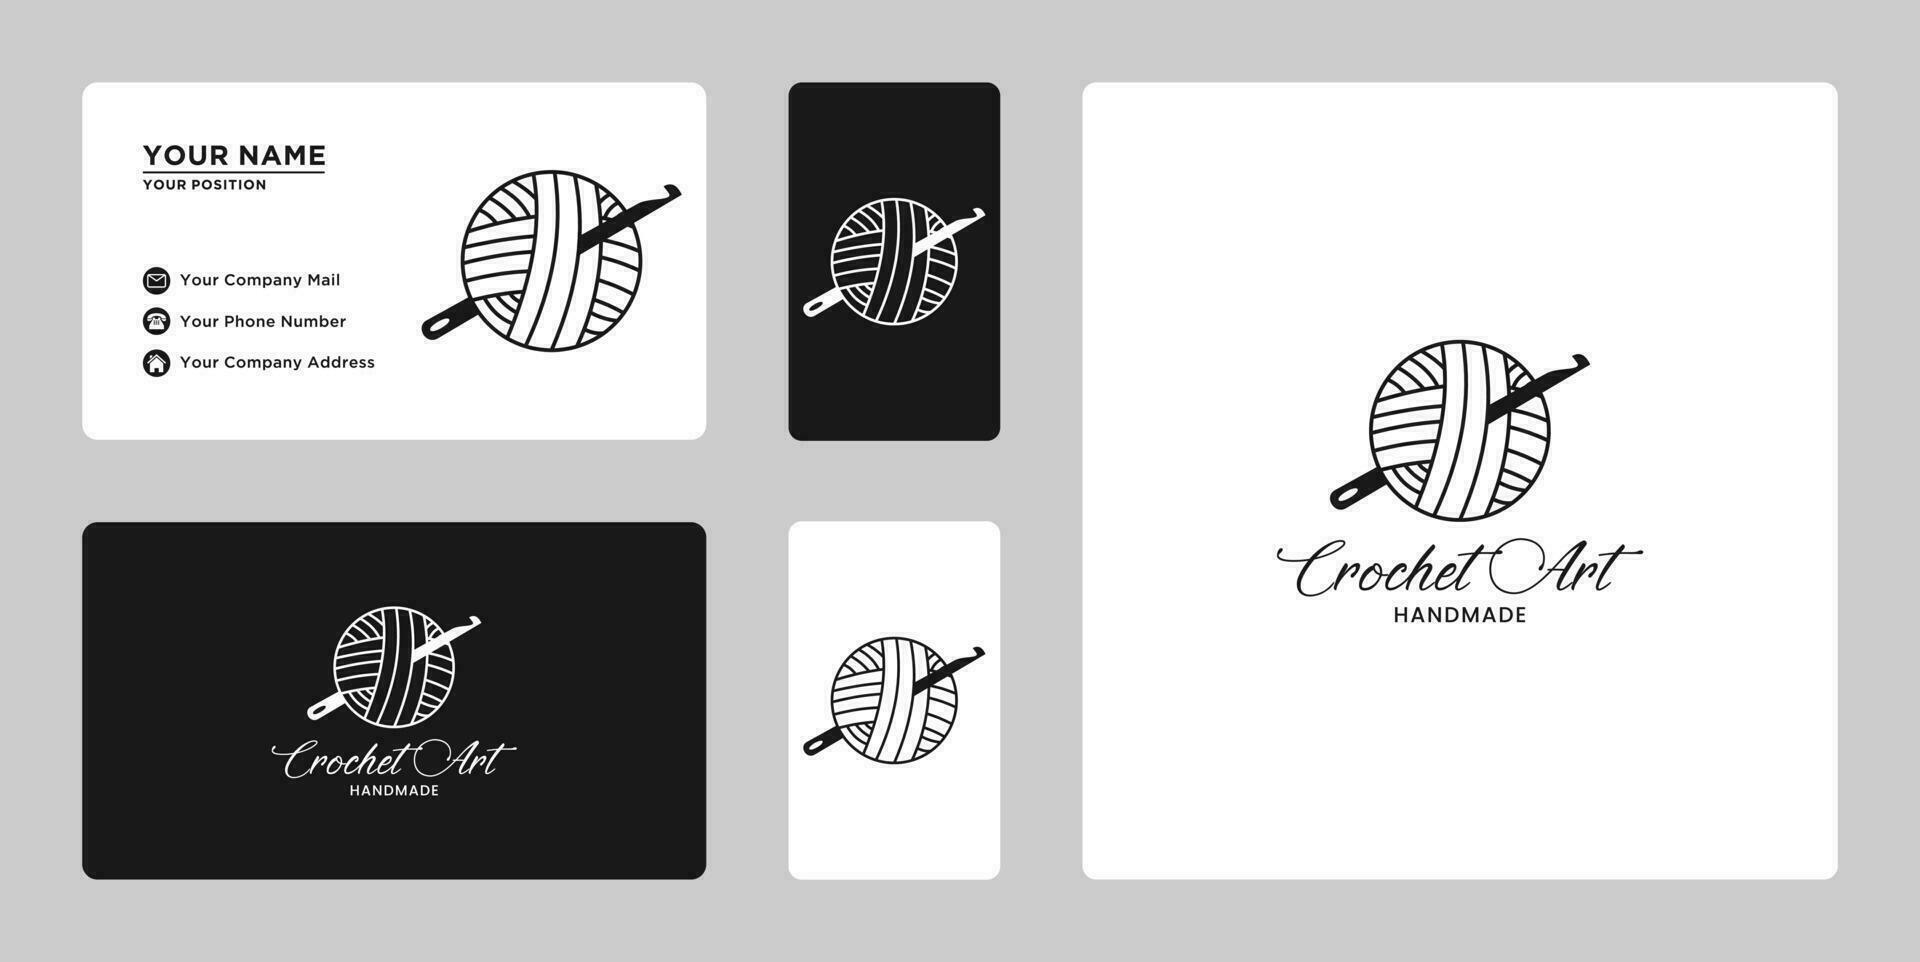 Handmade crochet and knitting logo design. For business authors of handicraft products. vector